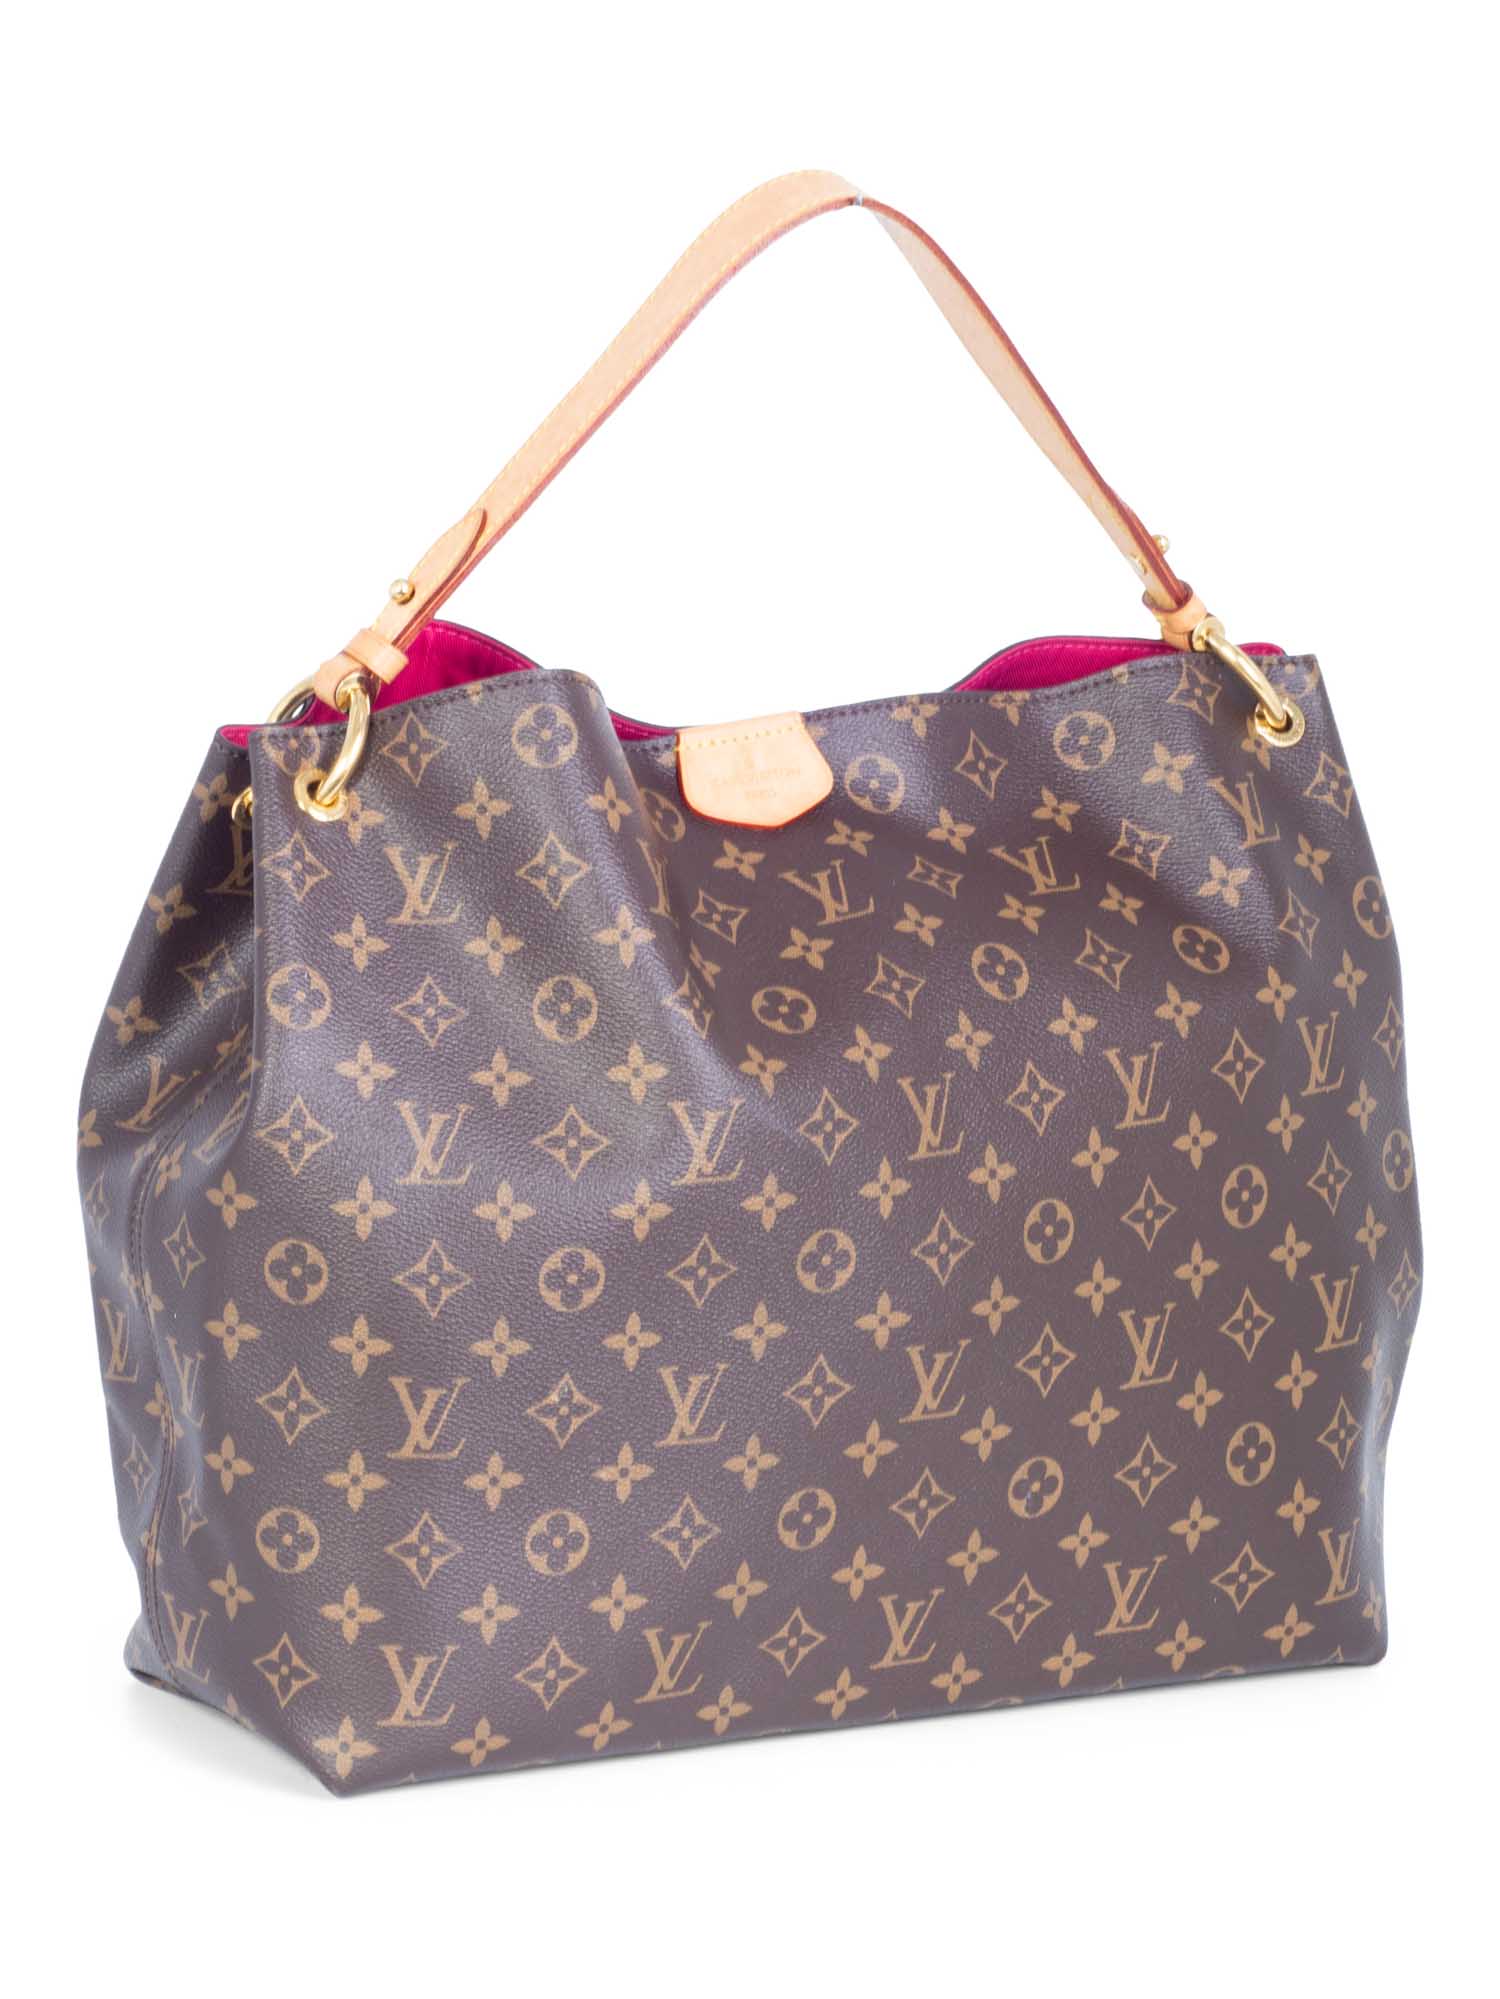 Size Comparison of the Louis Vuitton Neverfull Bags  Spotted Fashion